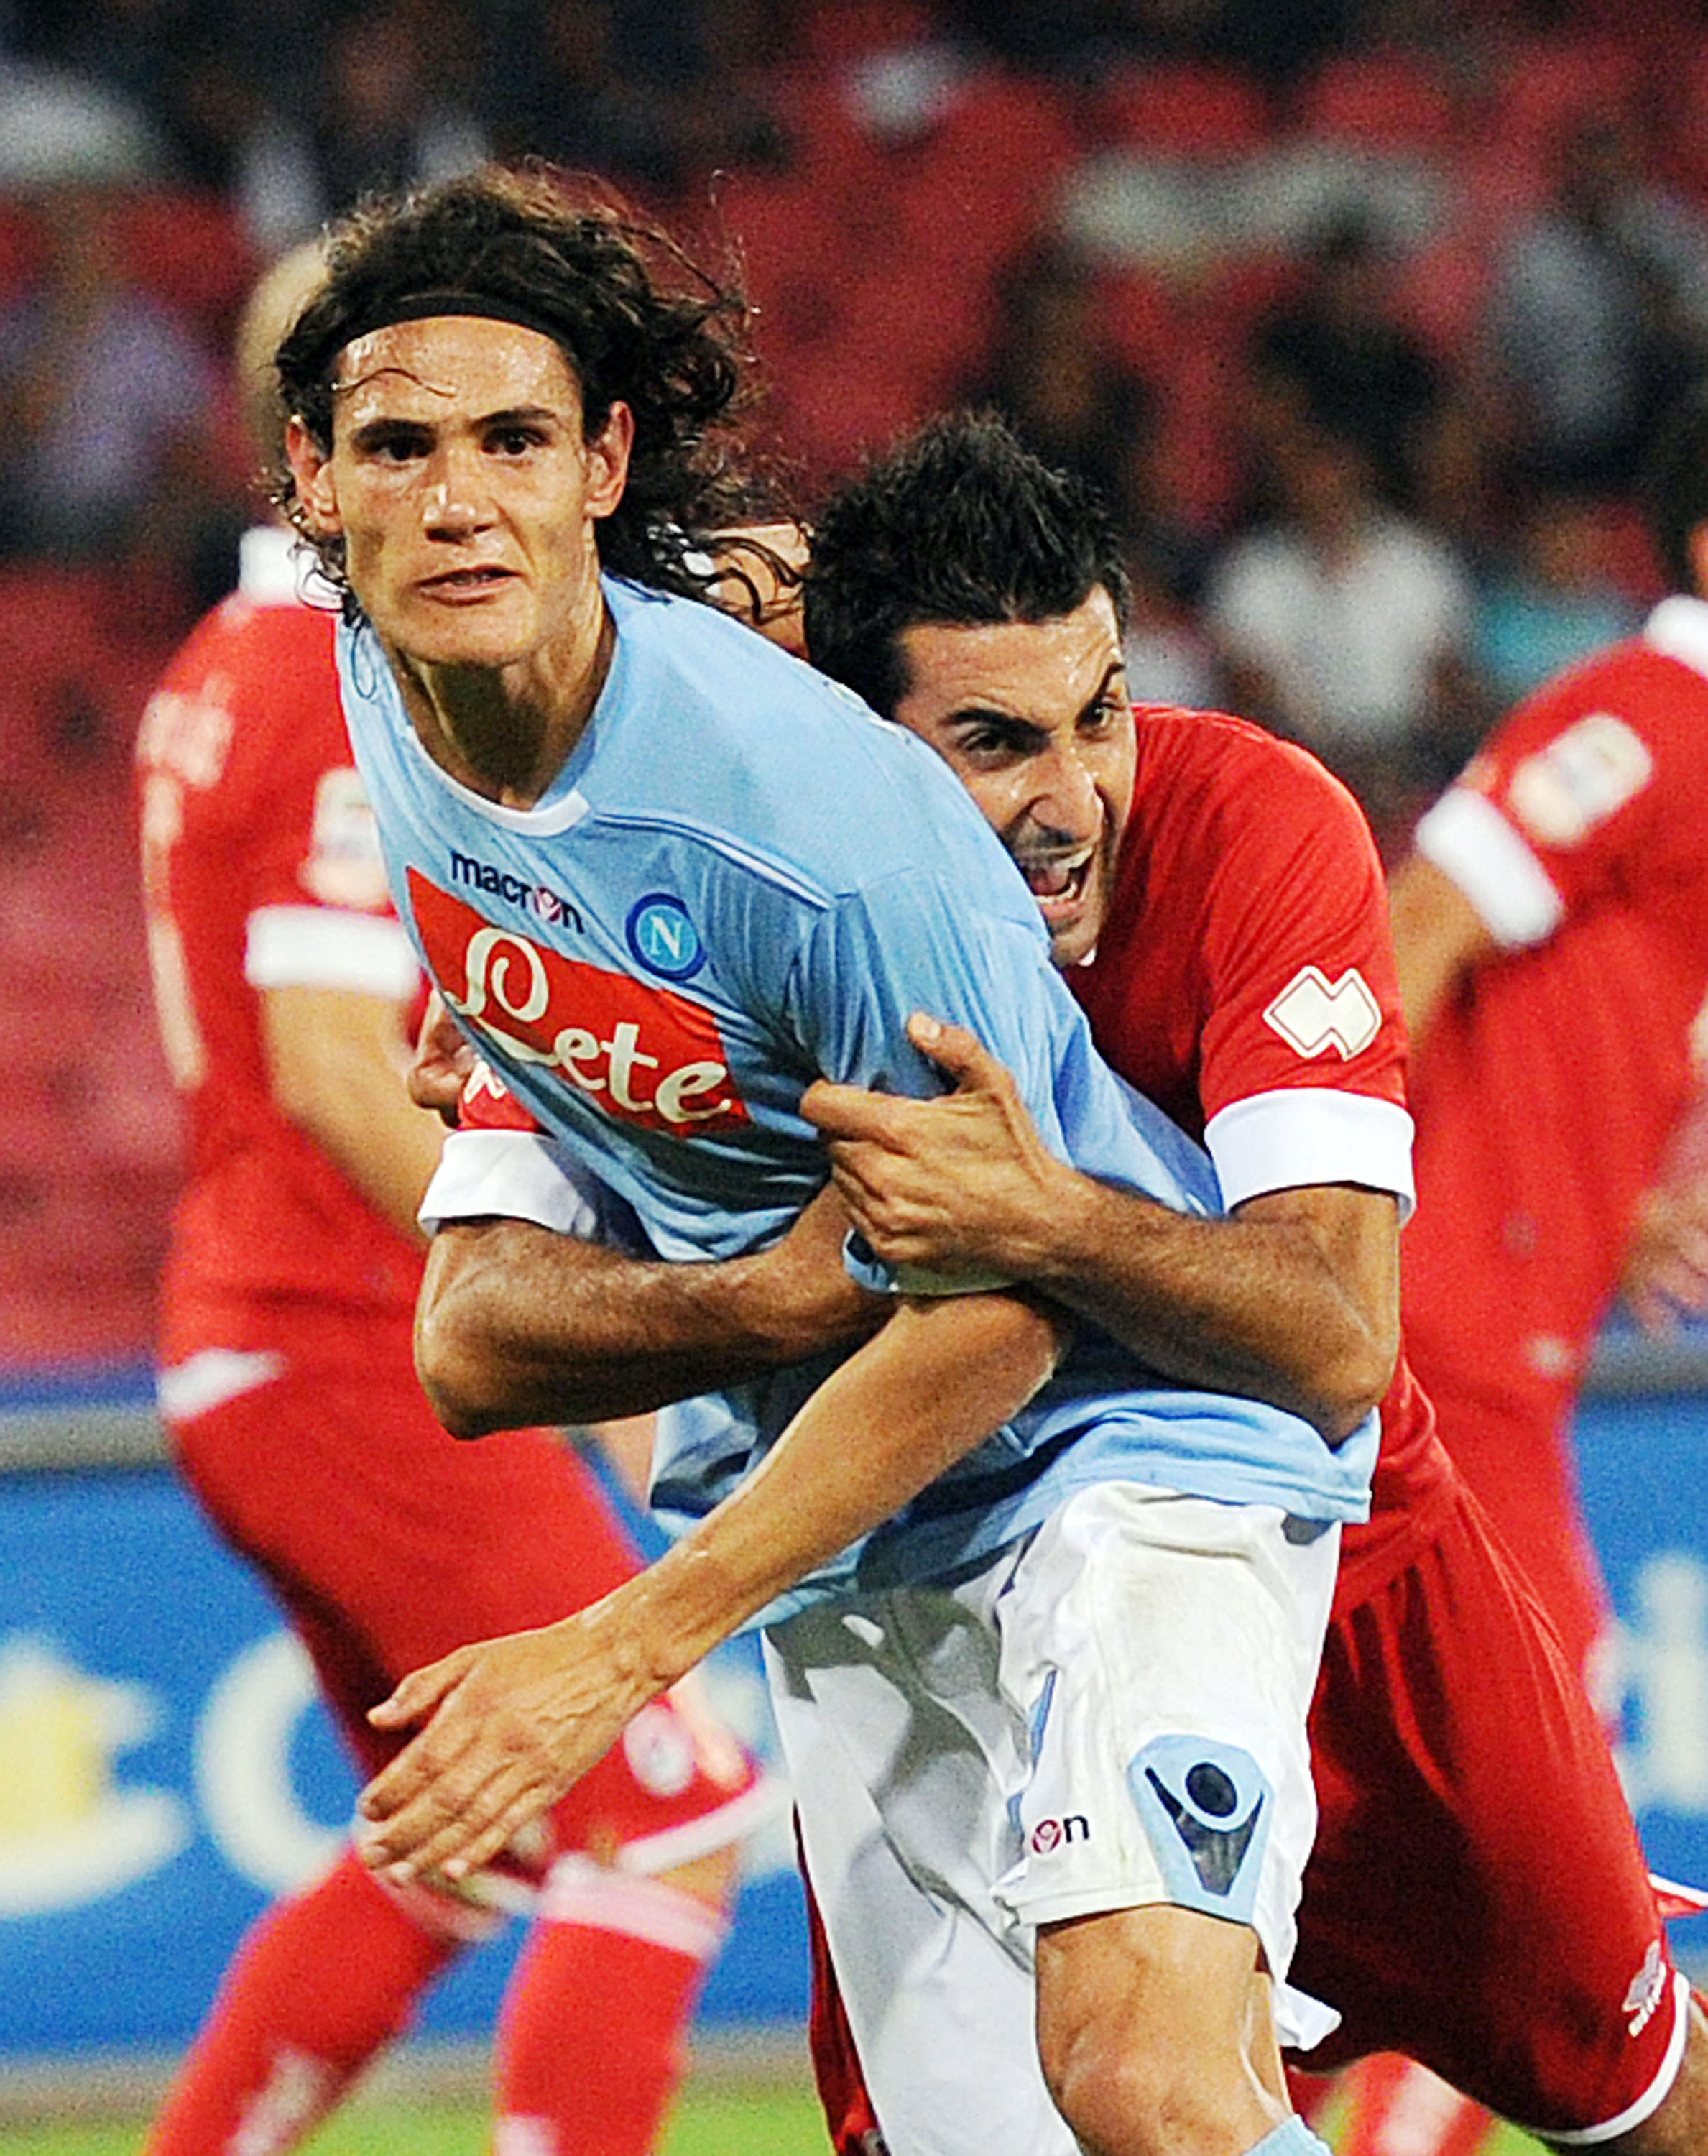 NAPLES, ITALY - SEPTEMBER 12:  Edinson Cavani  of Napoli and Nicola Belmonte of Bari in action  during the Serie A match between Napoli and Bari at Stadio San Paolo on September 12, 2010 in Naples, Italy.  (Photo by Giuseppe Bellini/Getty Images)